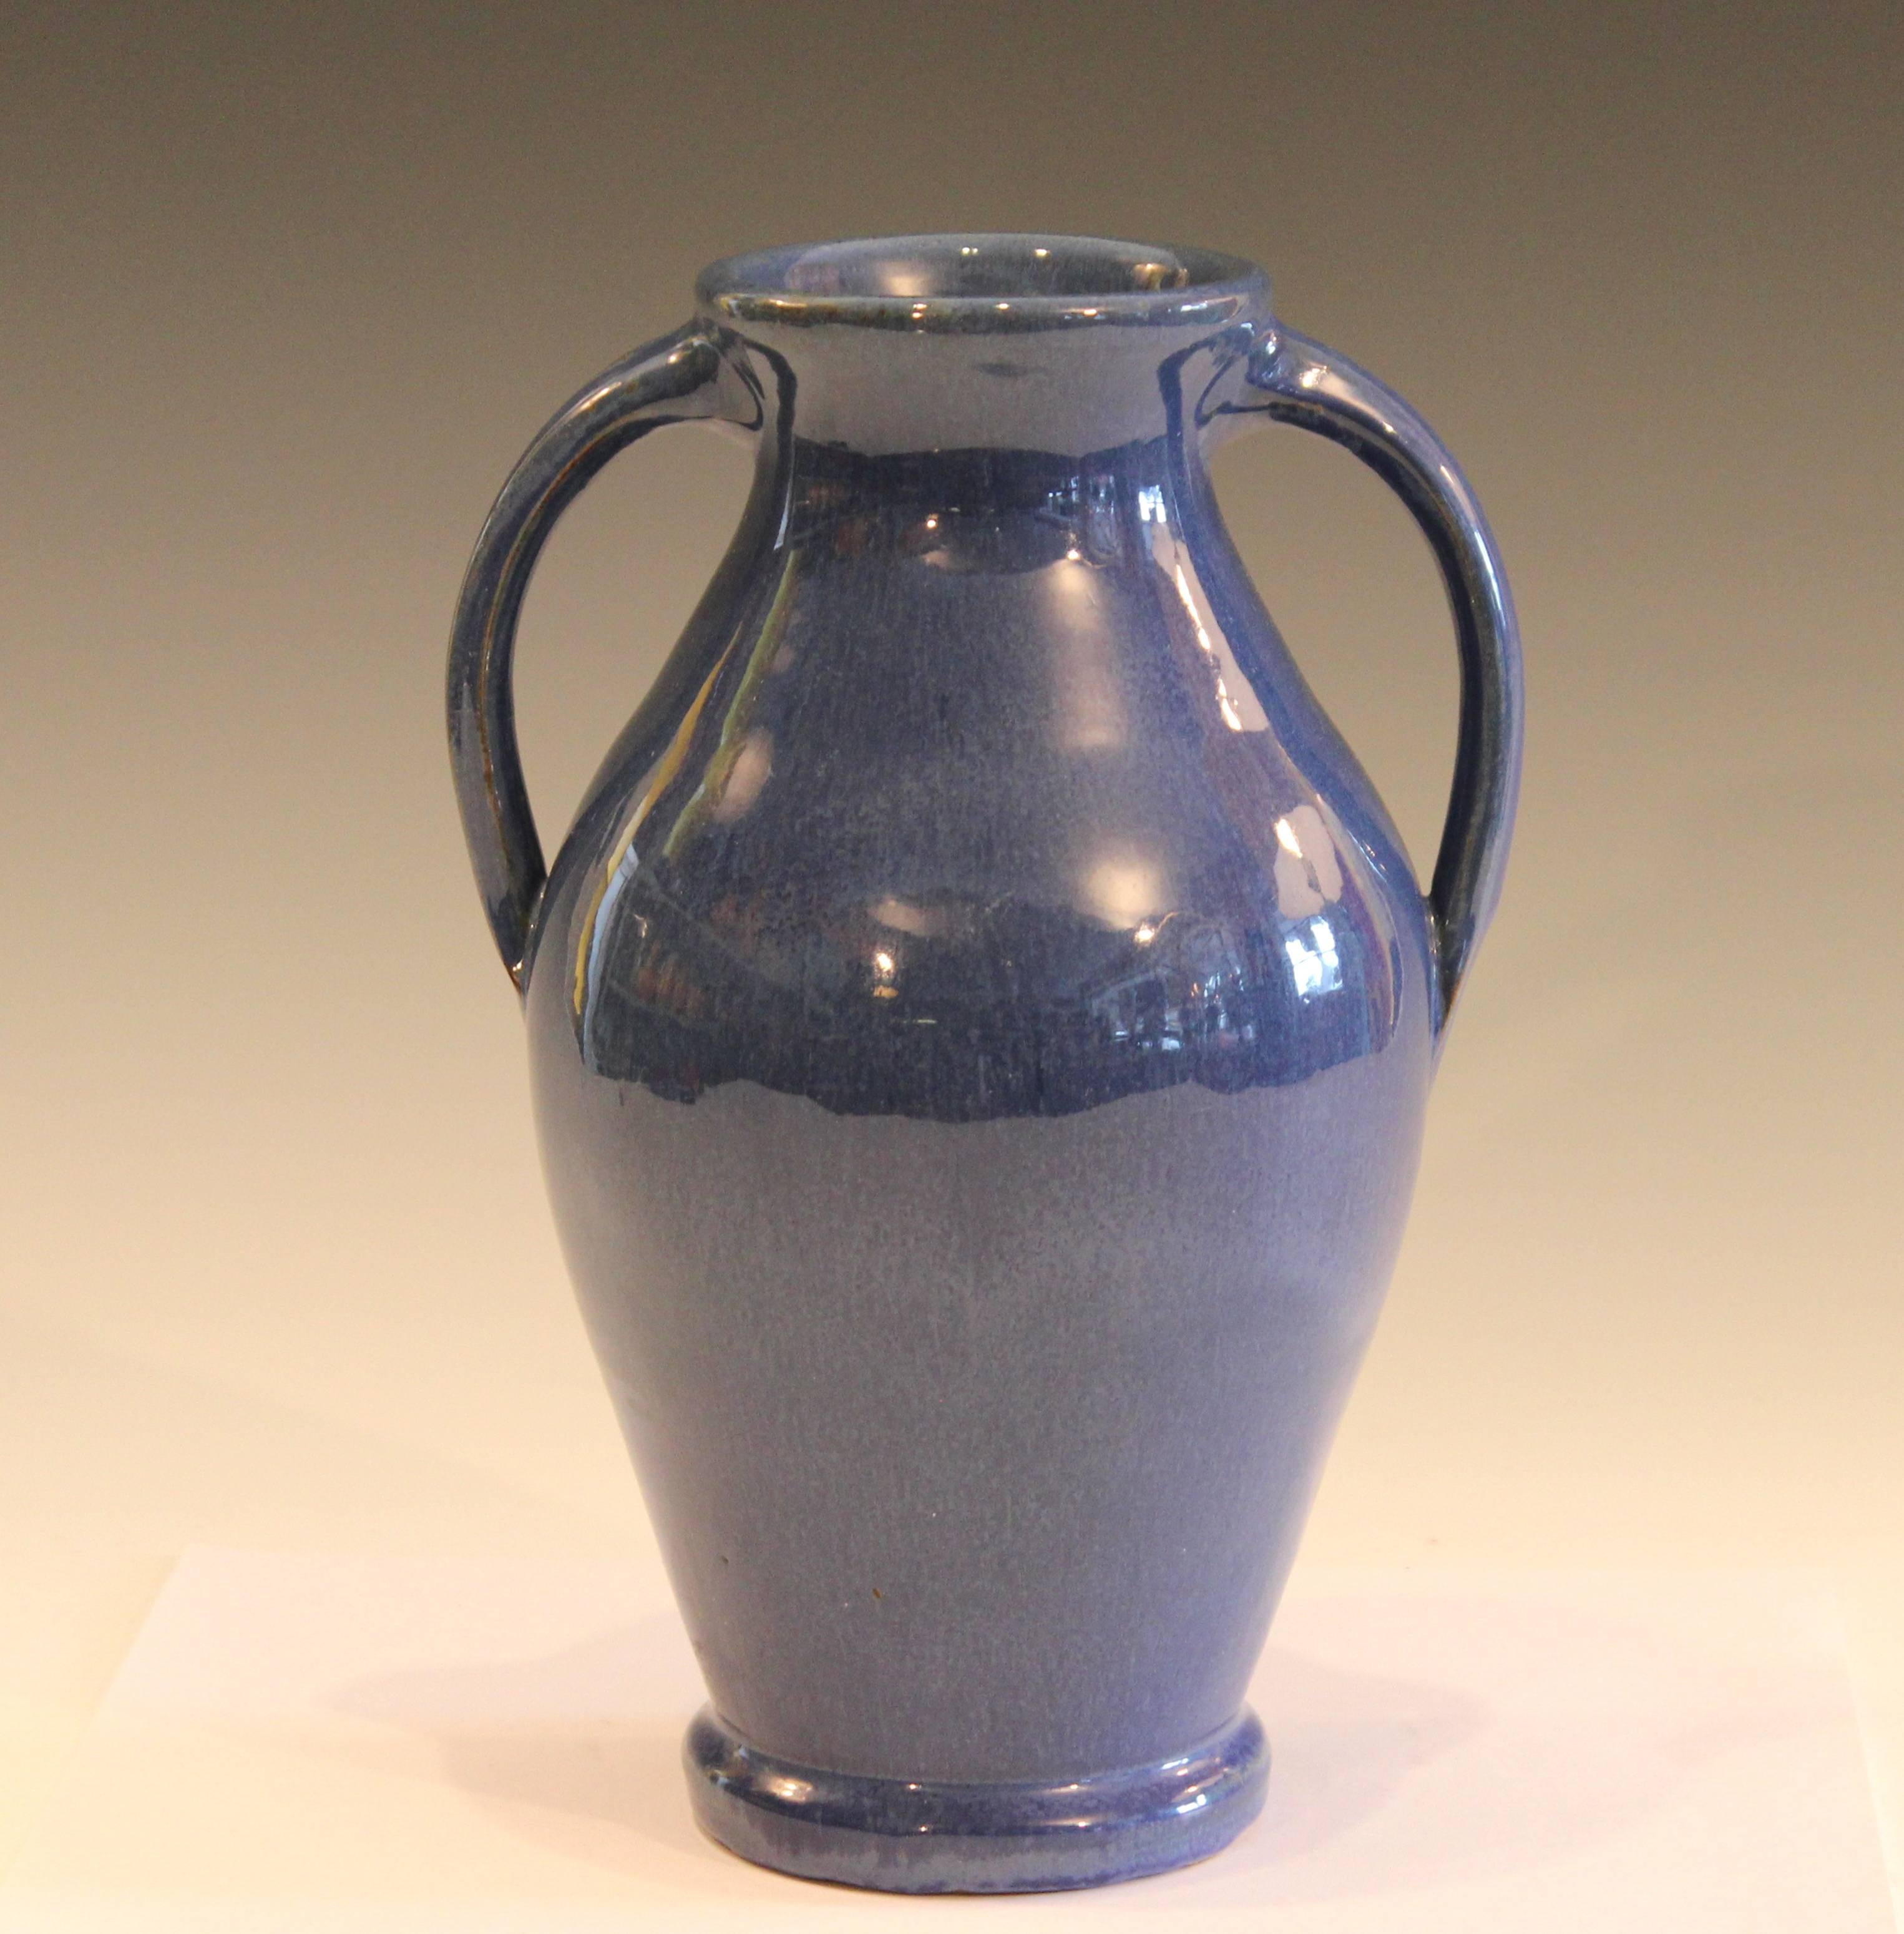 Vintage, hand-turned Waco, KY. Vase in variegated blue glaze, circa early to mid-20th century. Measures: 9 1/2